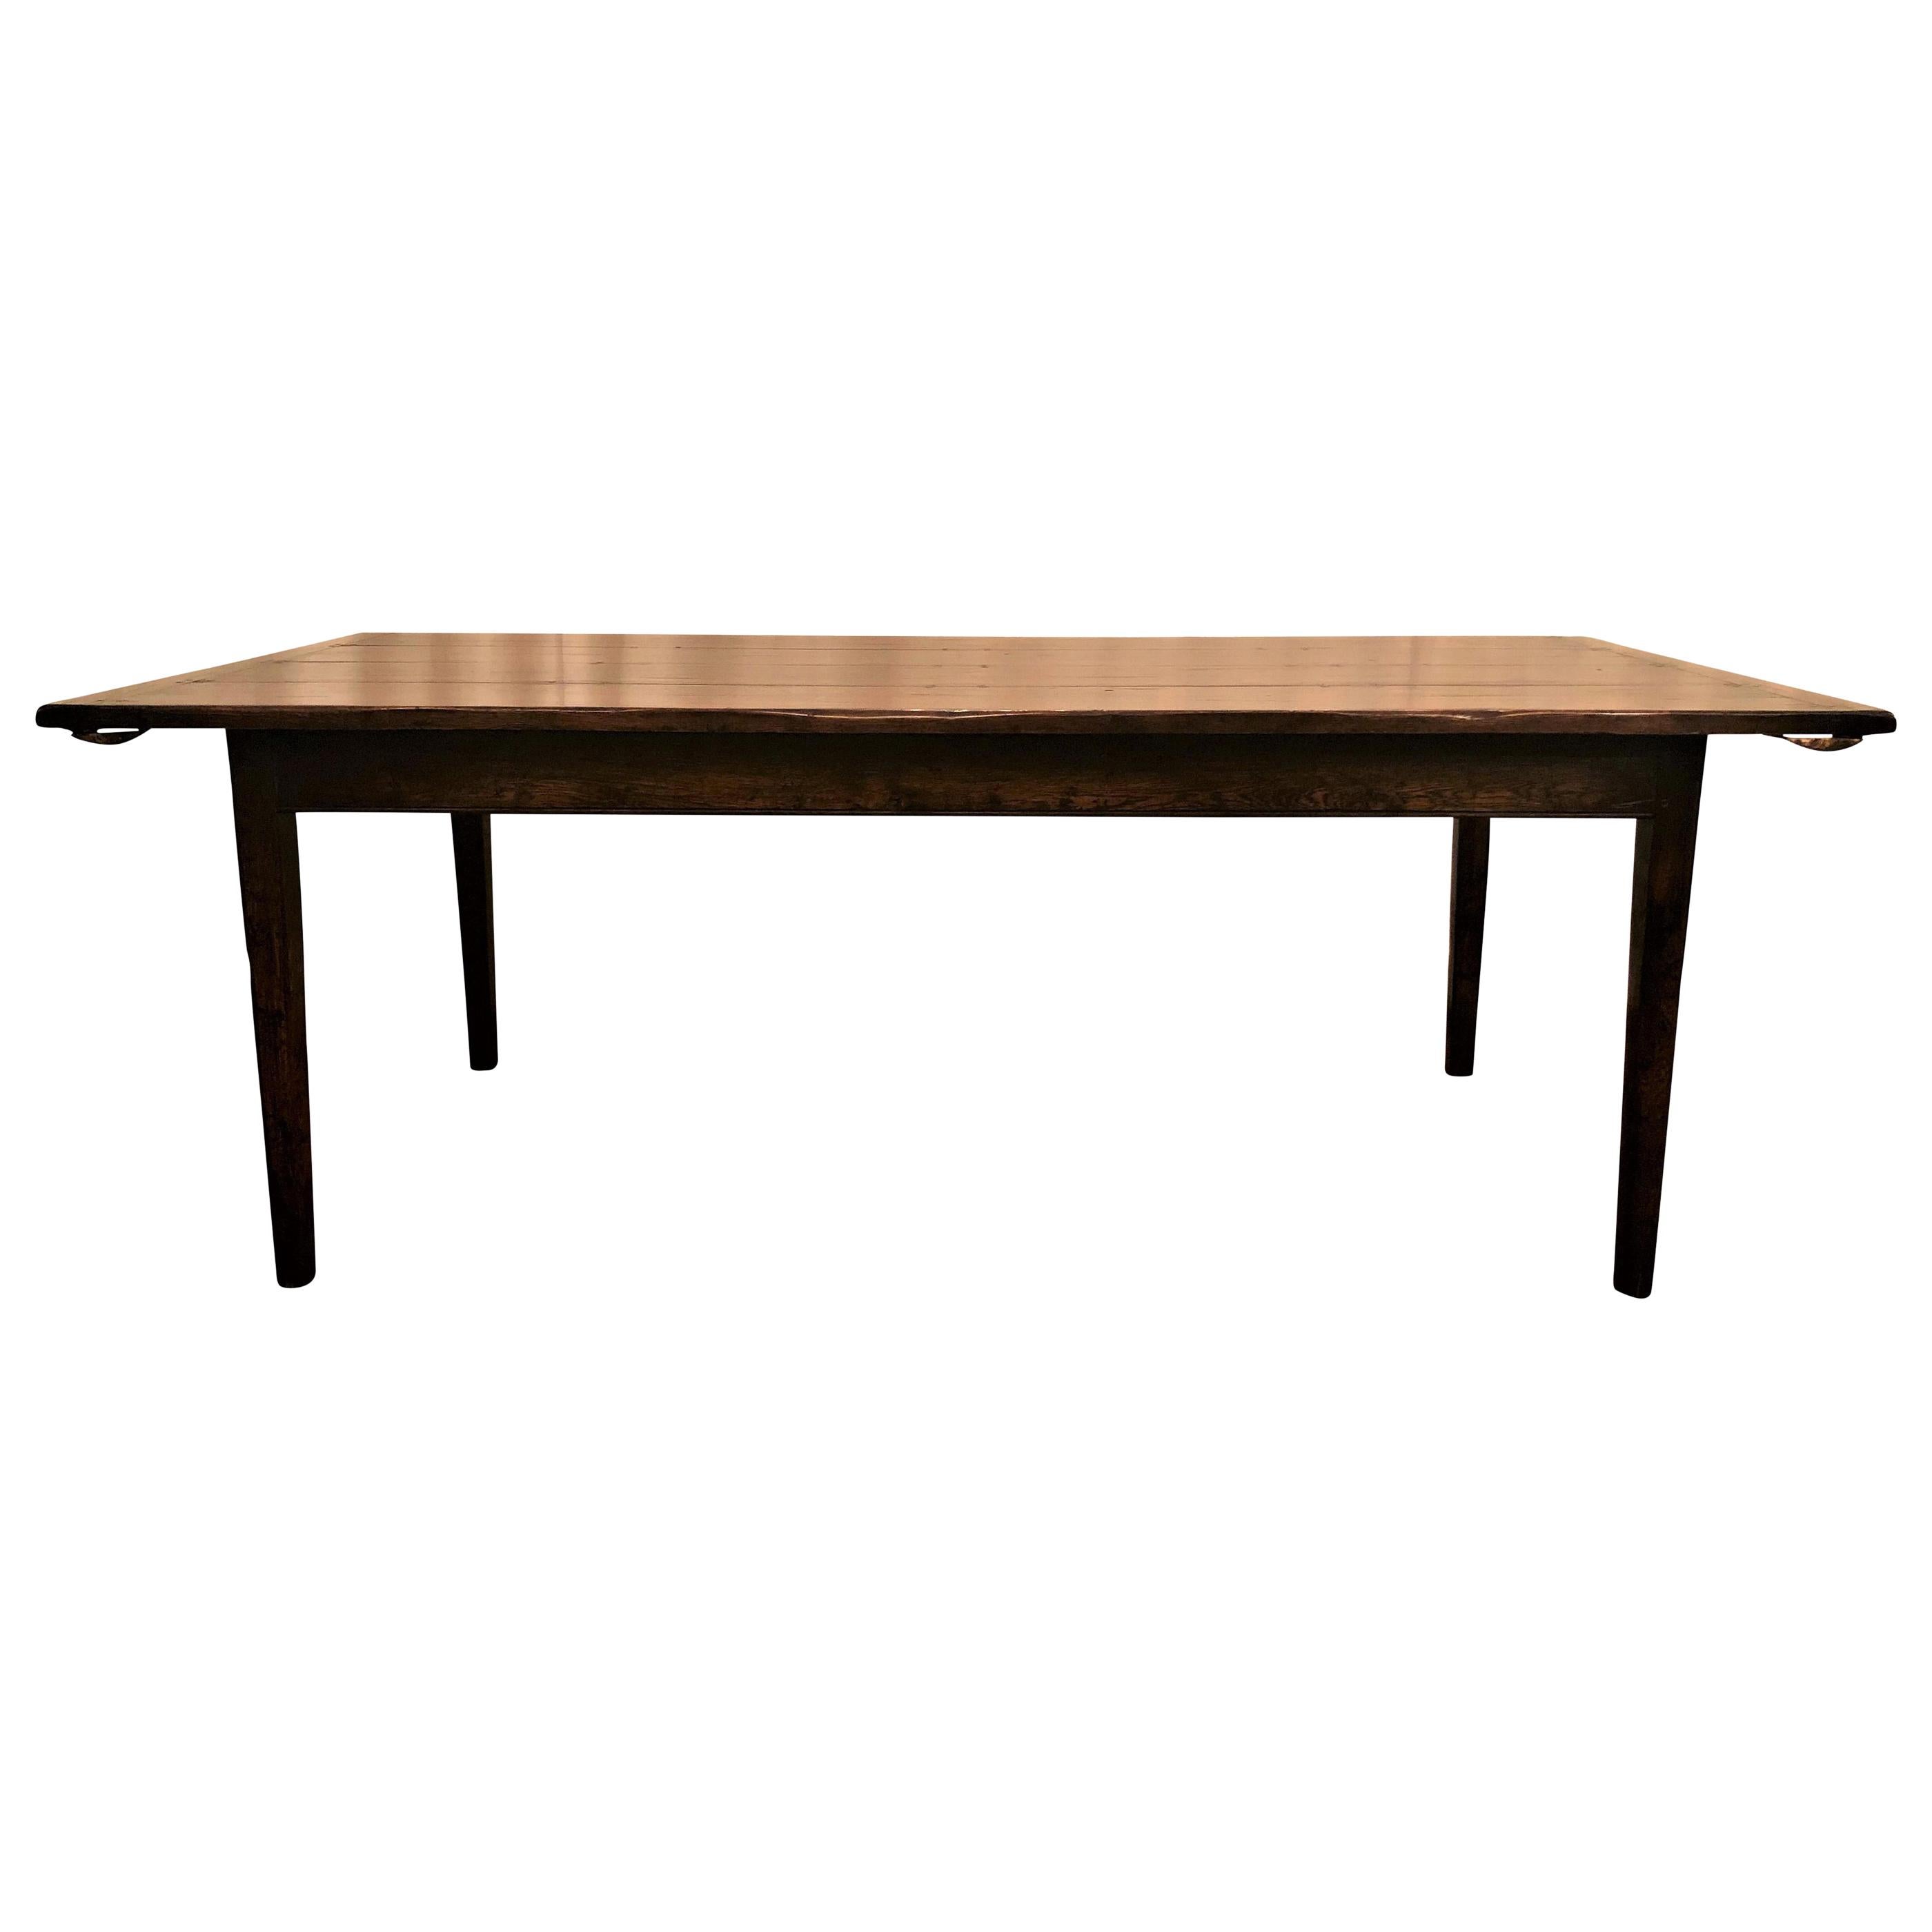 English Oak Farm Table with Two End Leaves